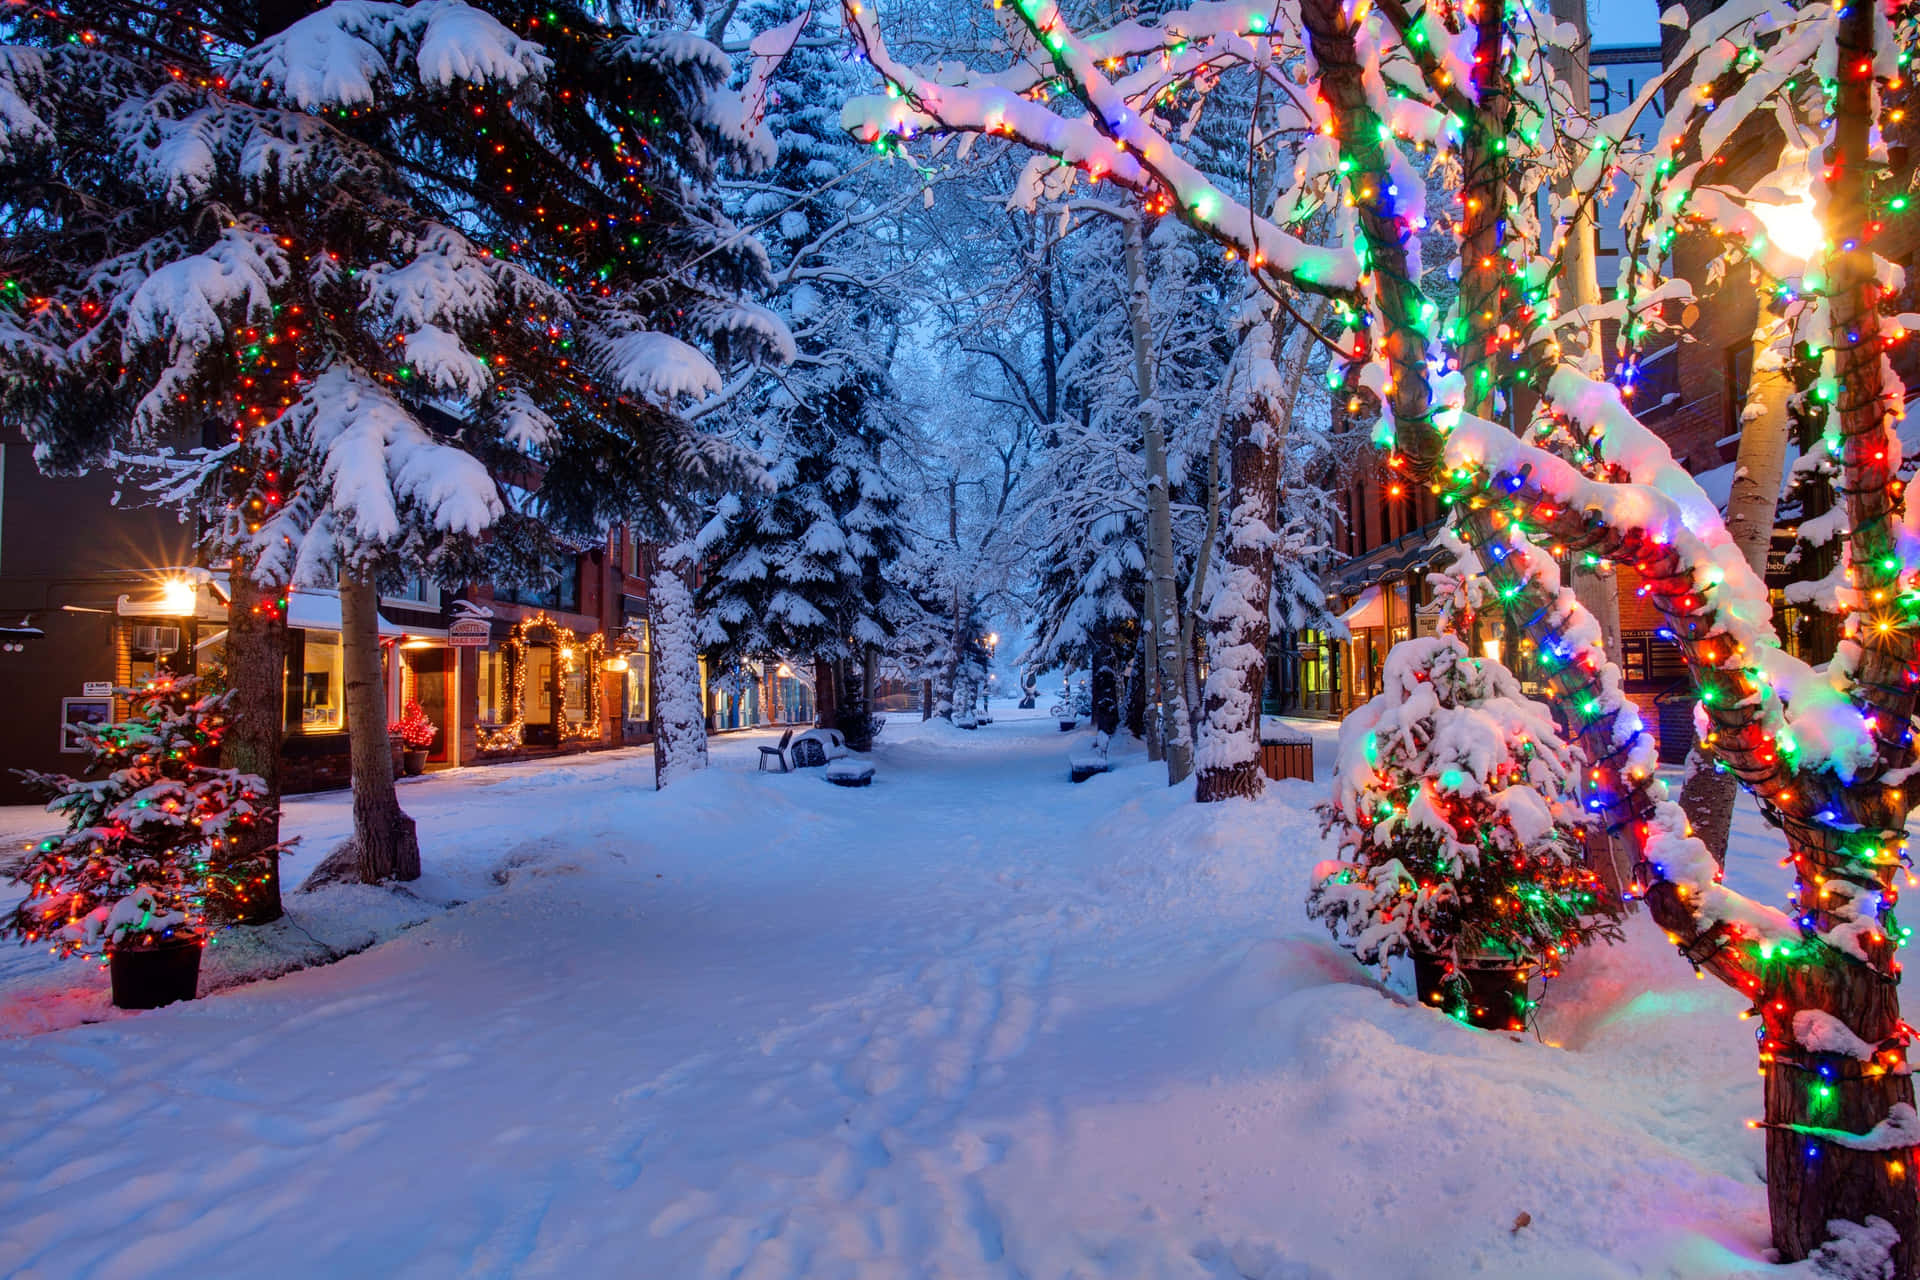 A Snowy Street With Christmas Lights And Trees